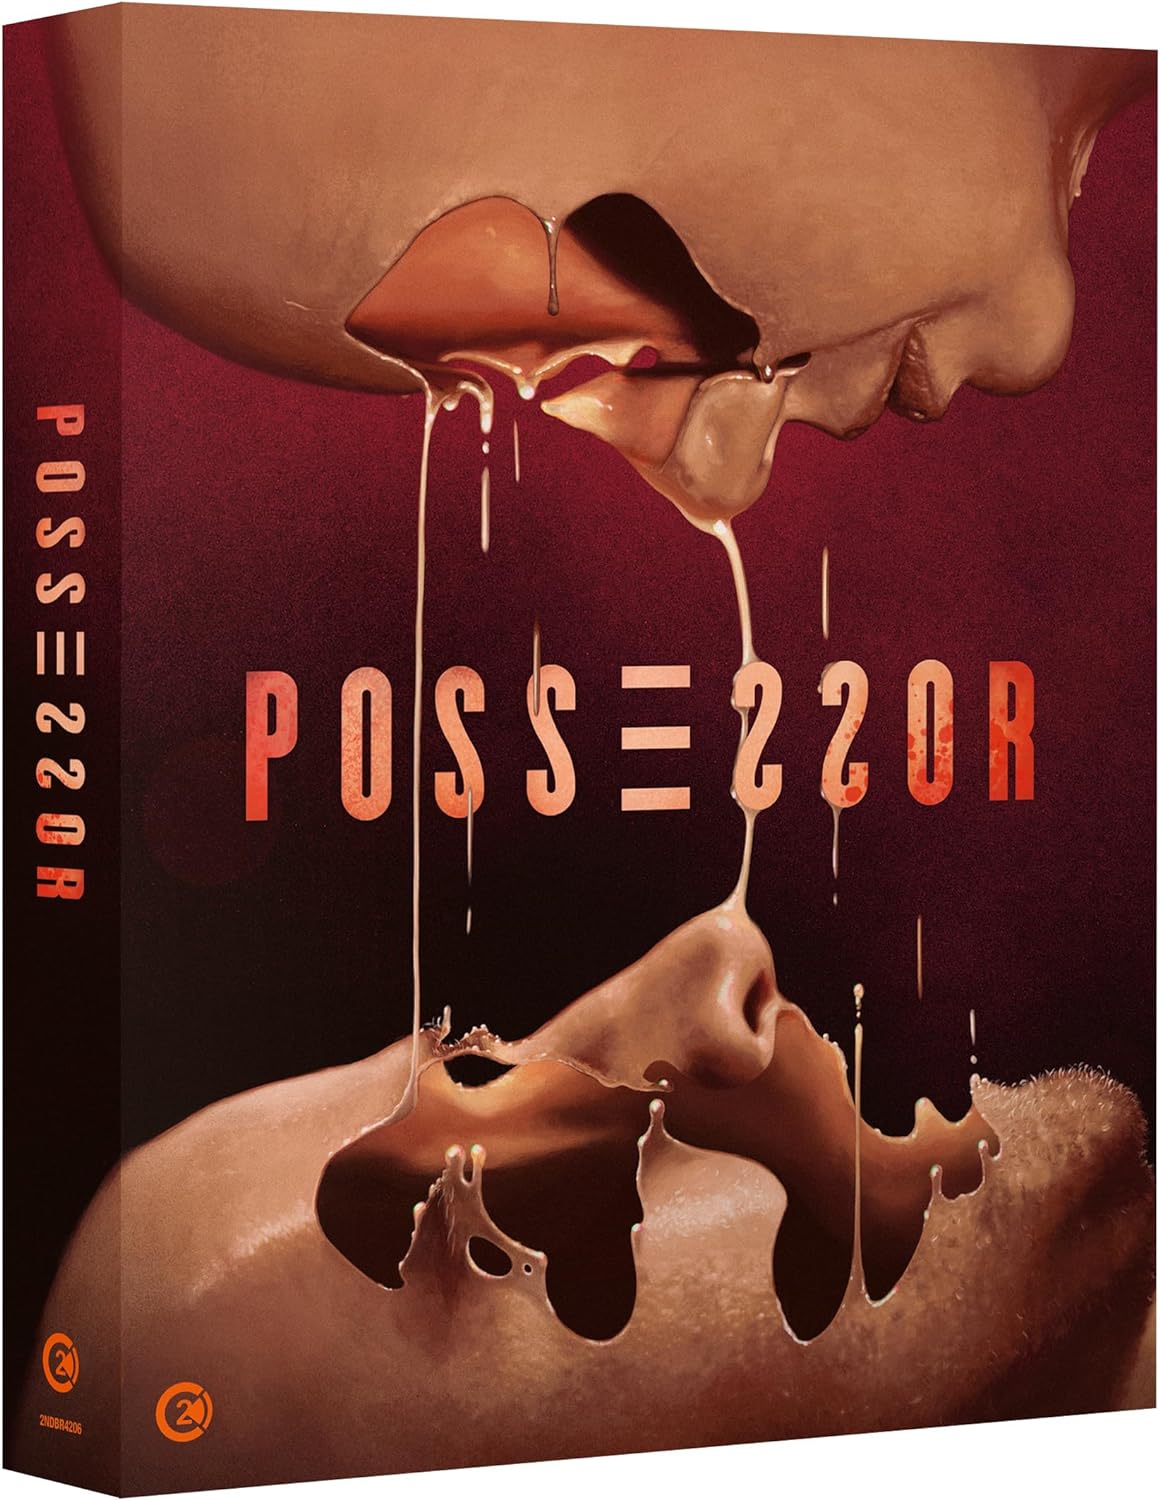 Possessor Limited Edition Second Sight Films 4K UHD/Blu-Ray [PRE-ORDER] [SLIPCOVER]